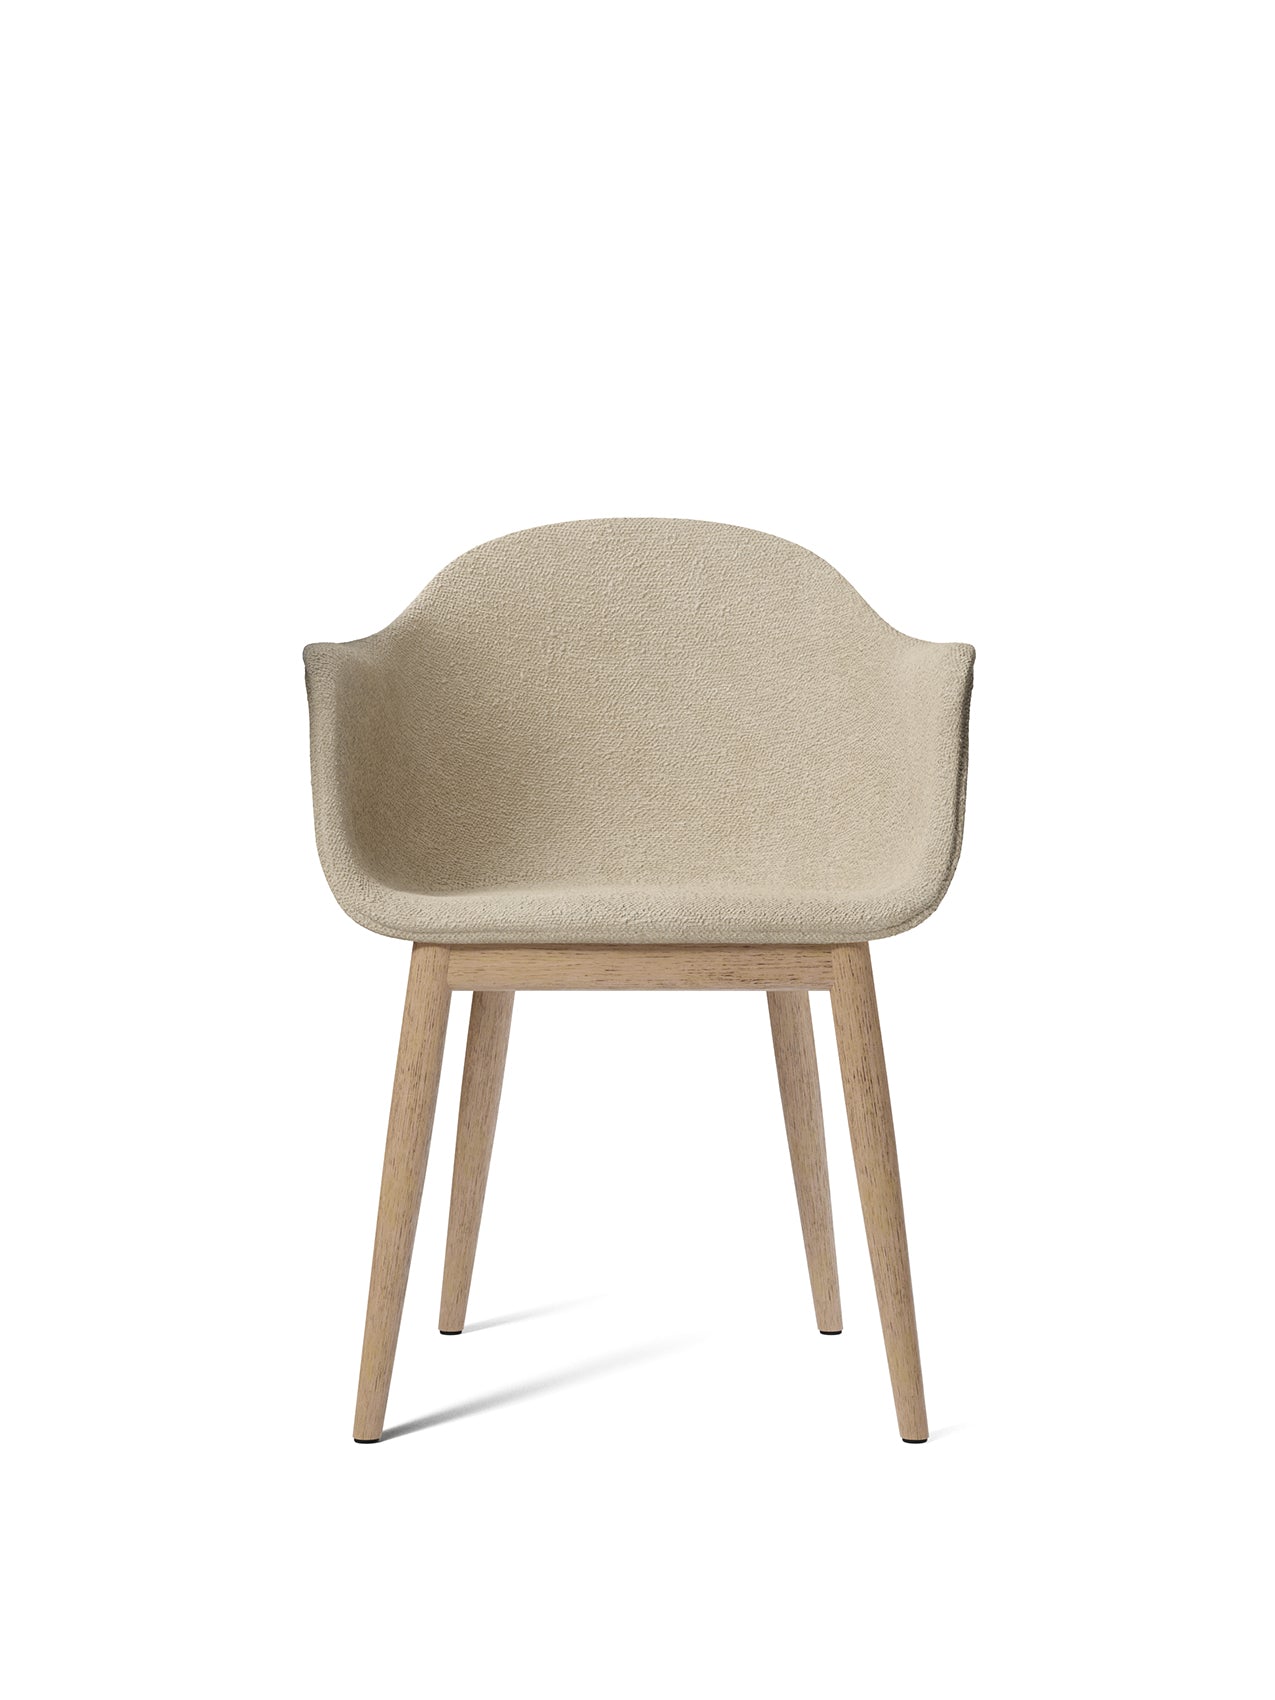 Harbour Arm Chair, Dining Height, Oak Base, Upholstered